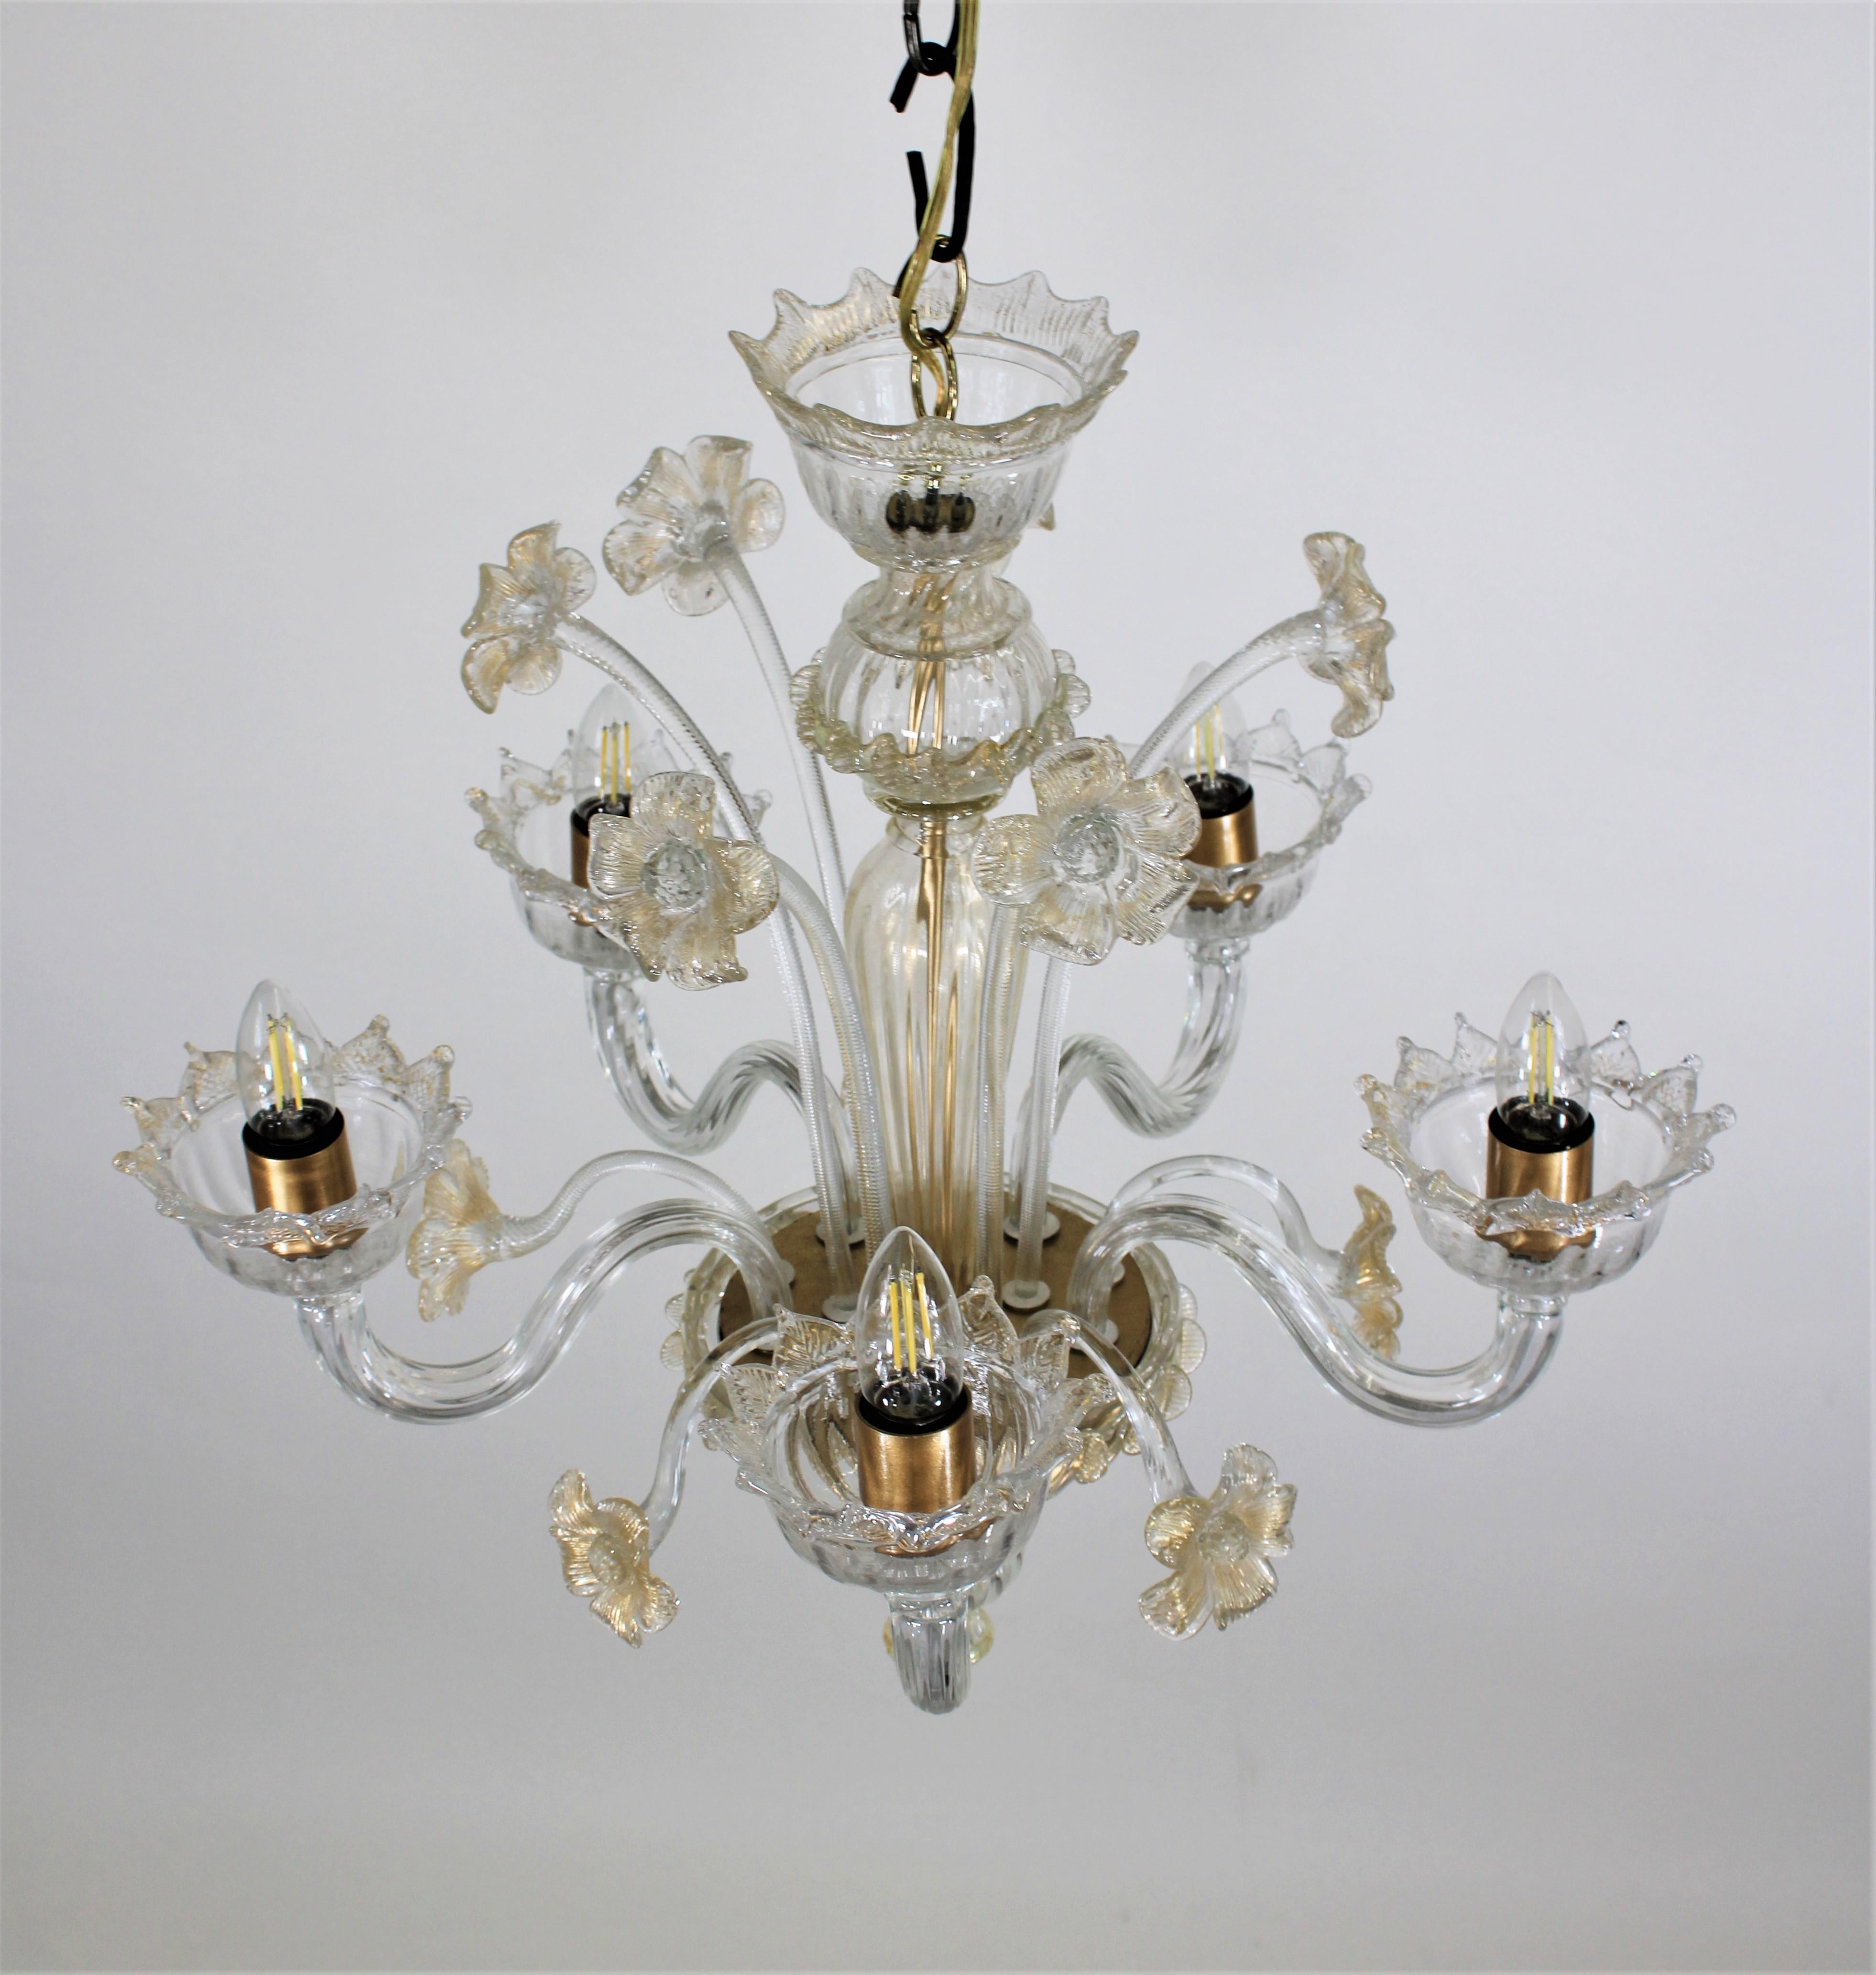 Hand-Crafted Vintage Baroque Style Five Arm Gold Infused Cristallo Murano Glass Chandelier For Sale